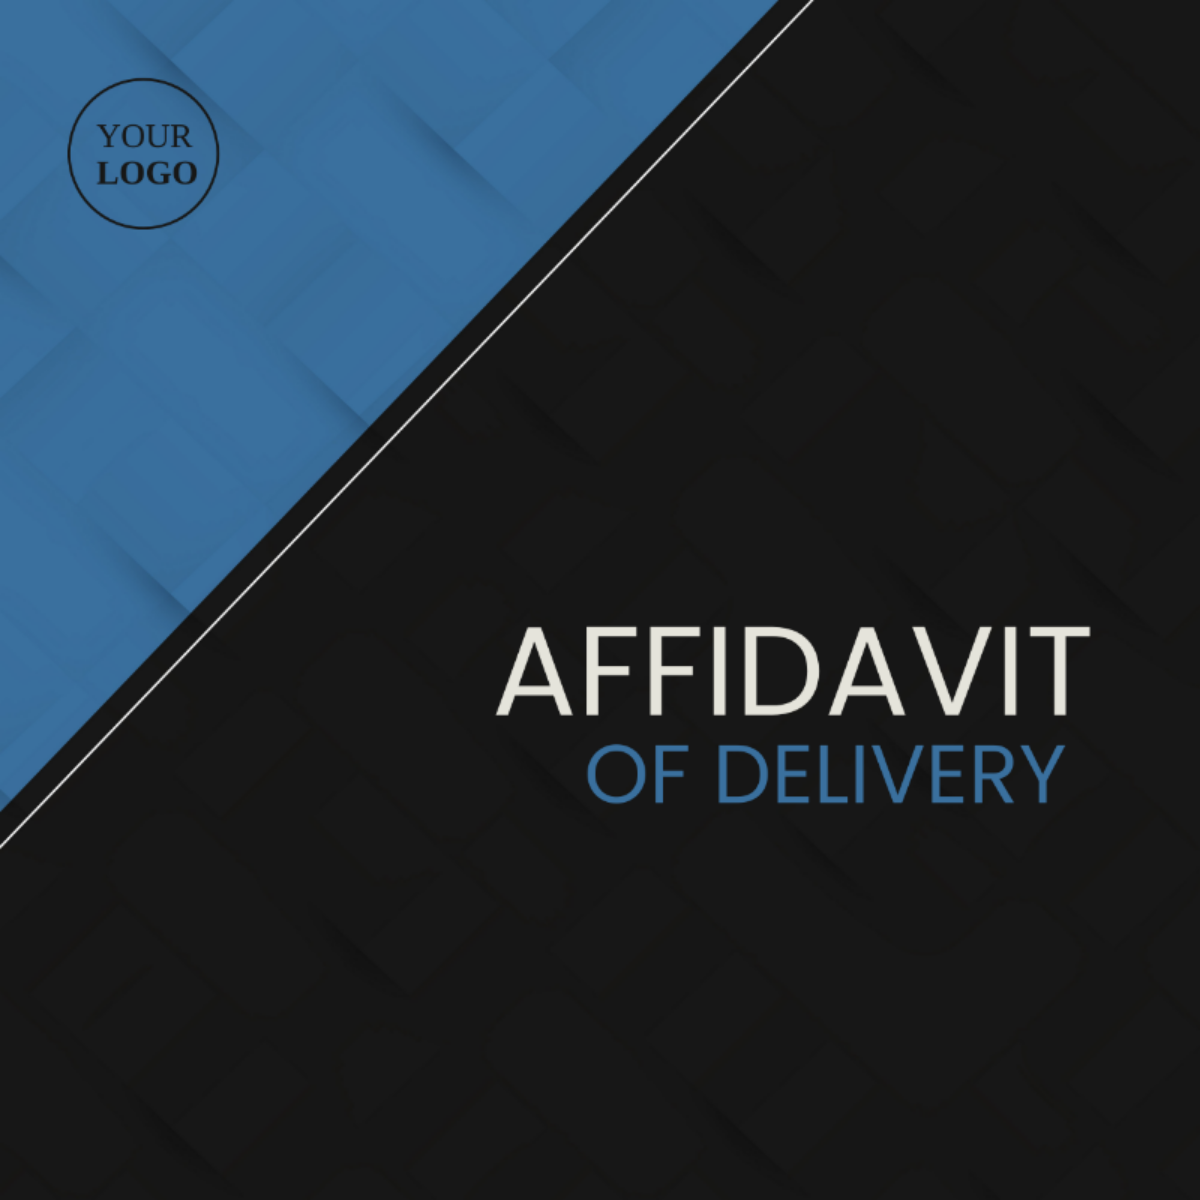 Affidavit of Delivery Template